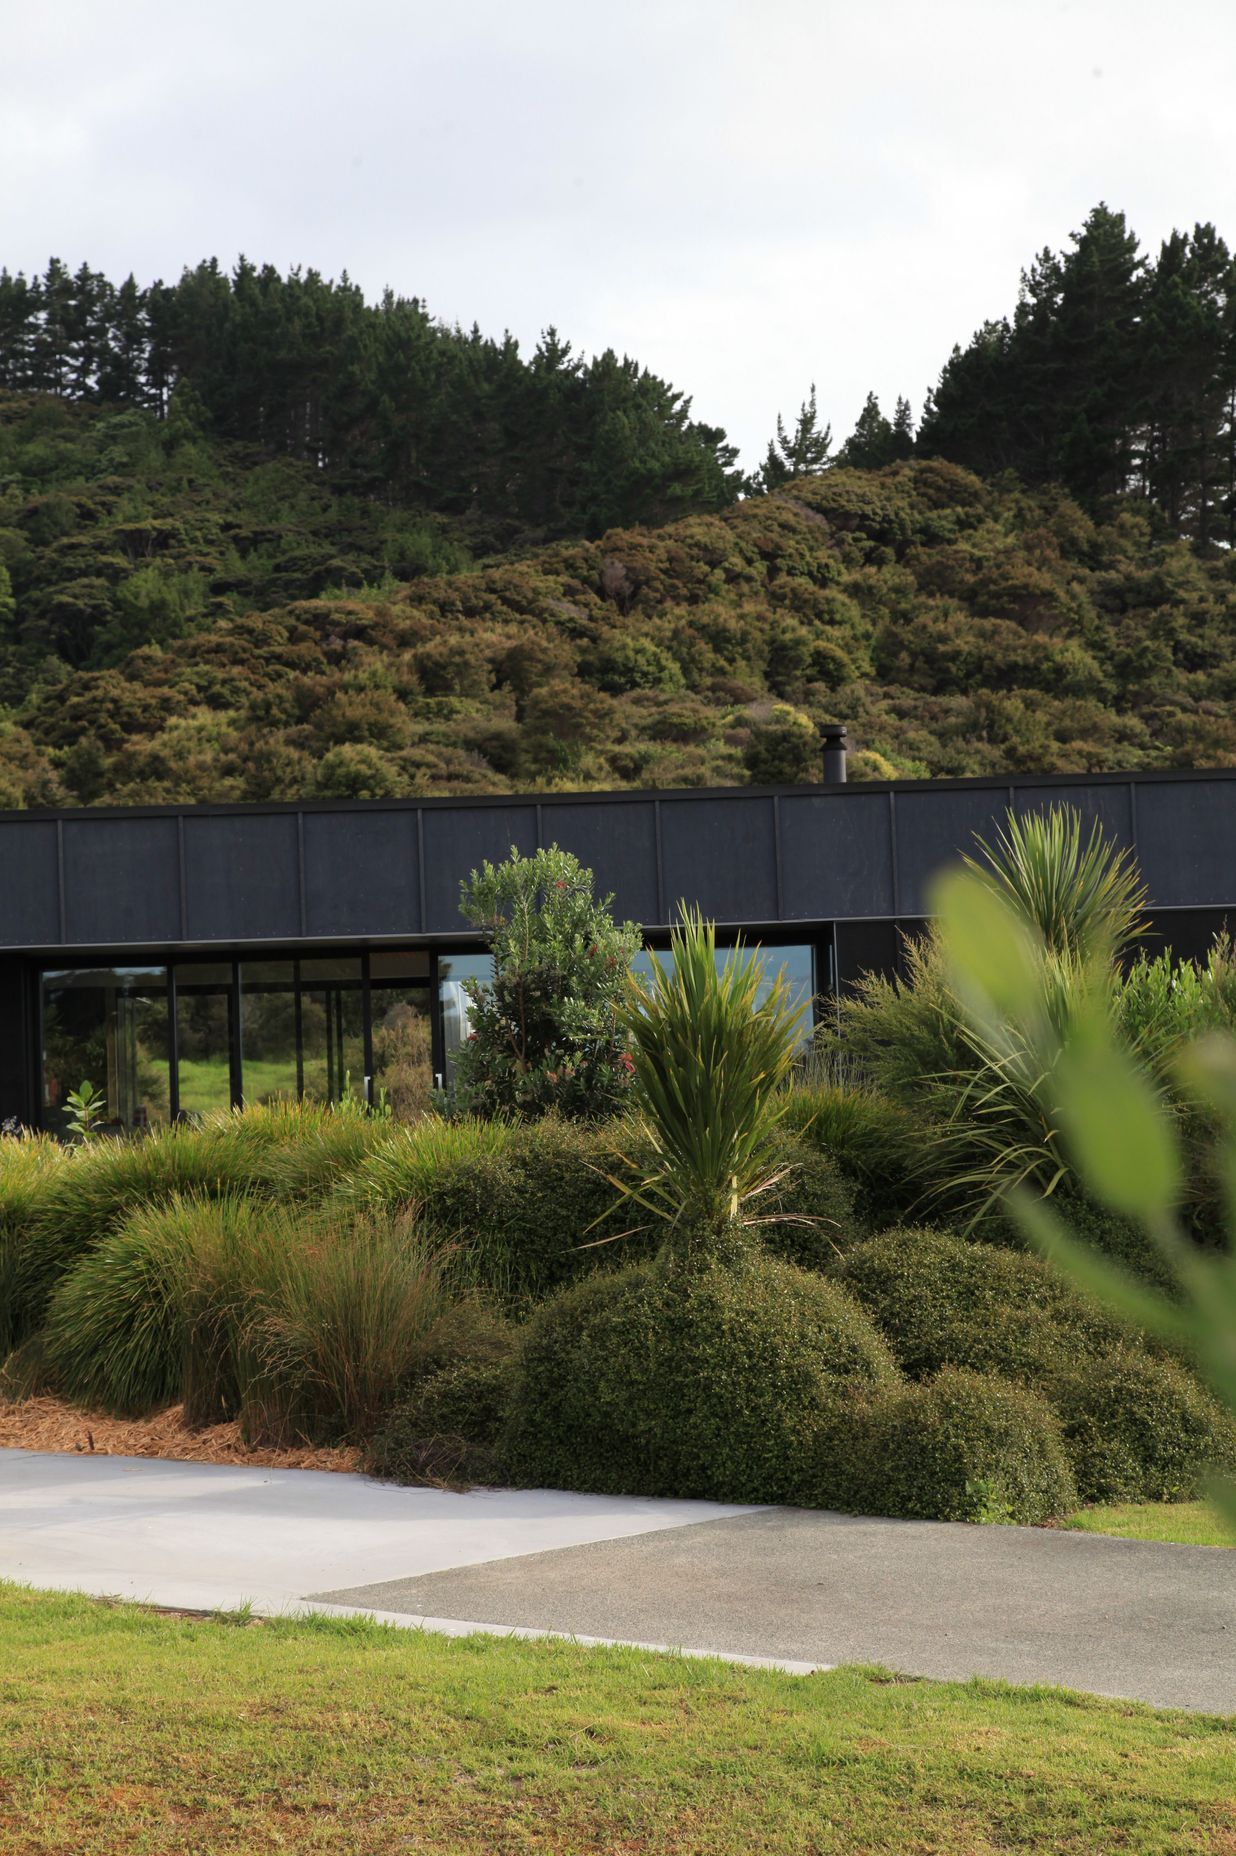 Claire’s Mangawhai home was designed by Gerrad Hall and the exterior is stained in Resene Woodsman Pitch Black. The dark colour allows the home to blend into the deep green landscape, without distracting the eye. Claire used a Resene CoolColour variant, which allows the dark colour to stay cooler even in summer.